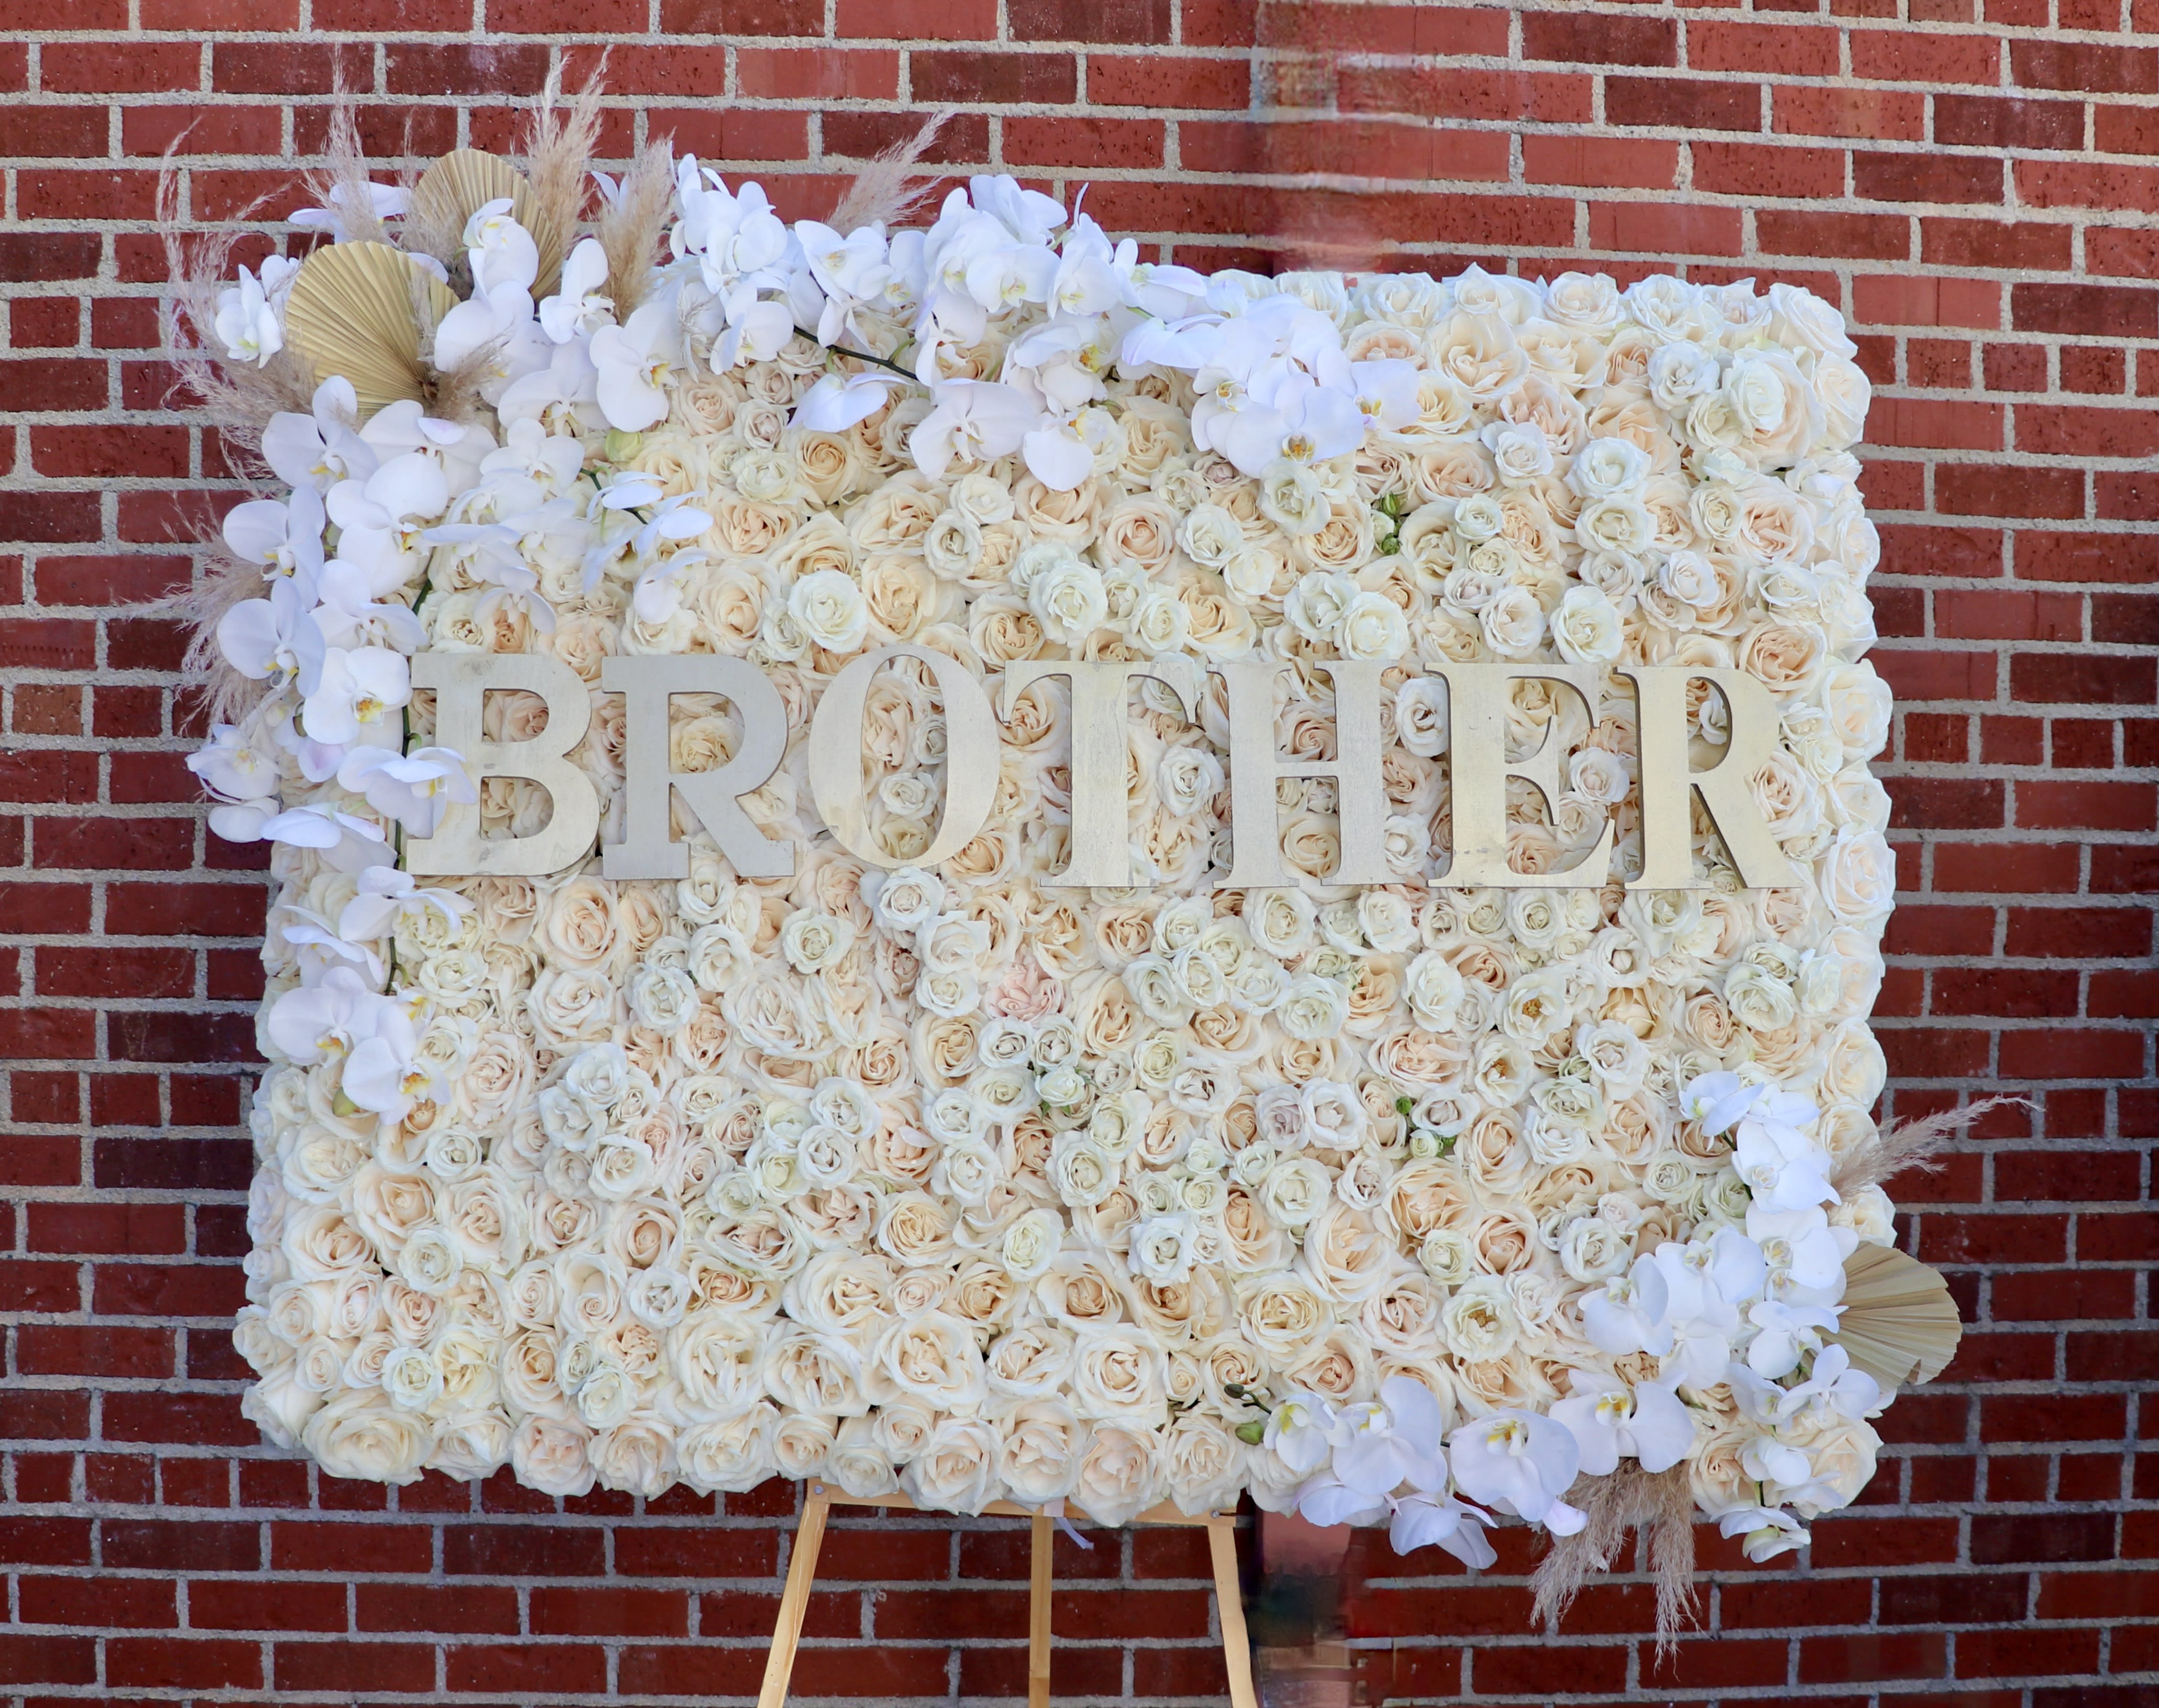 Rose Board  - This frame is covered in roses and accented with orchids and other florals along with a loved one's name or custom lettering.   Standard: 2'x3' Deluxe: 3'x3' Premium: 4'x3'